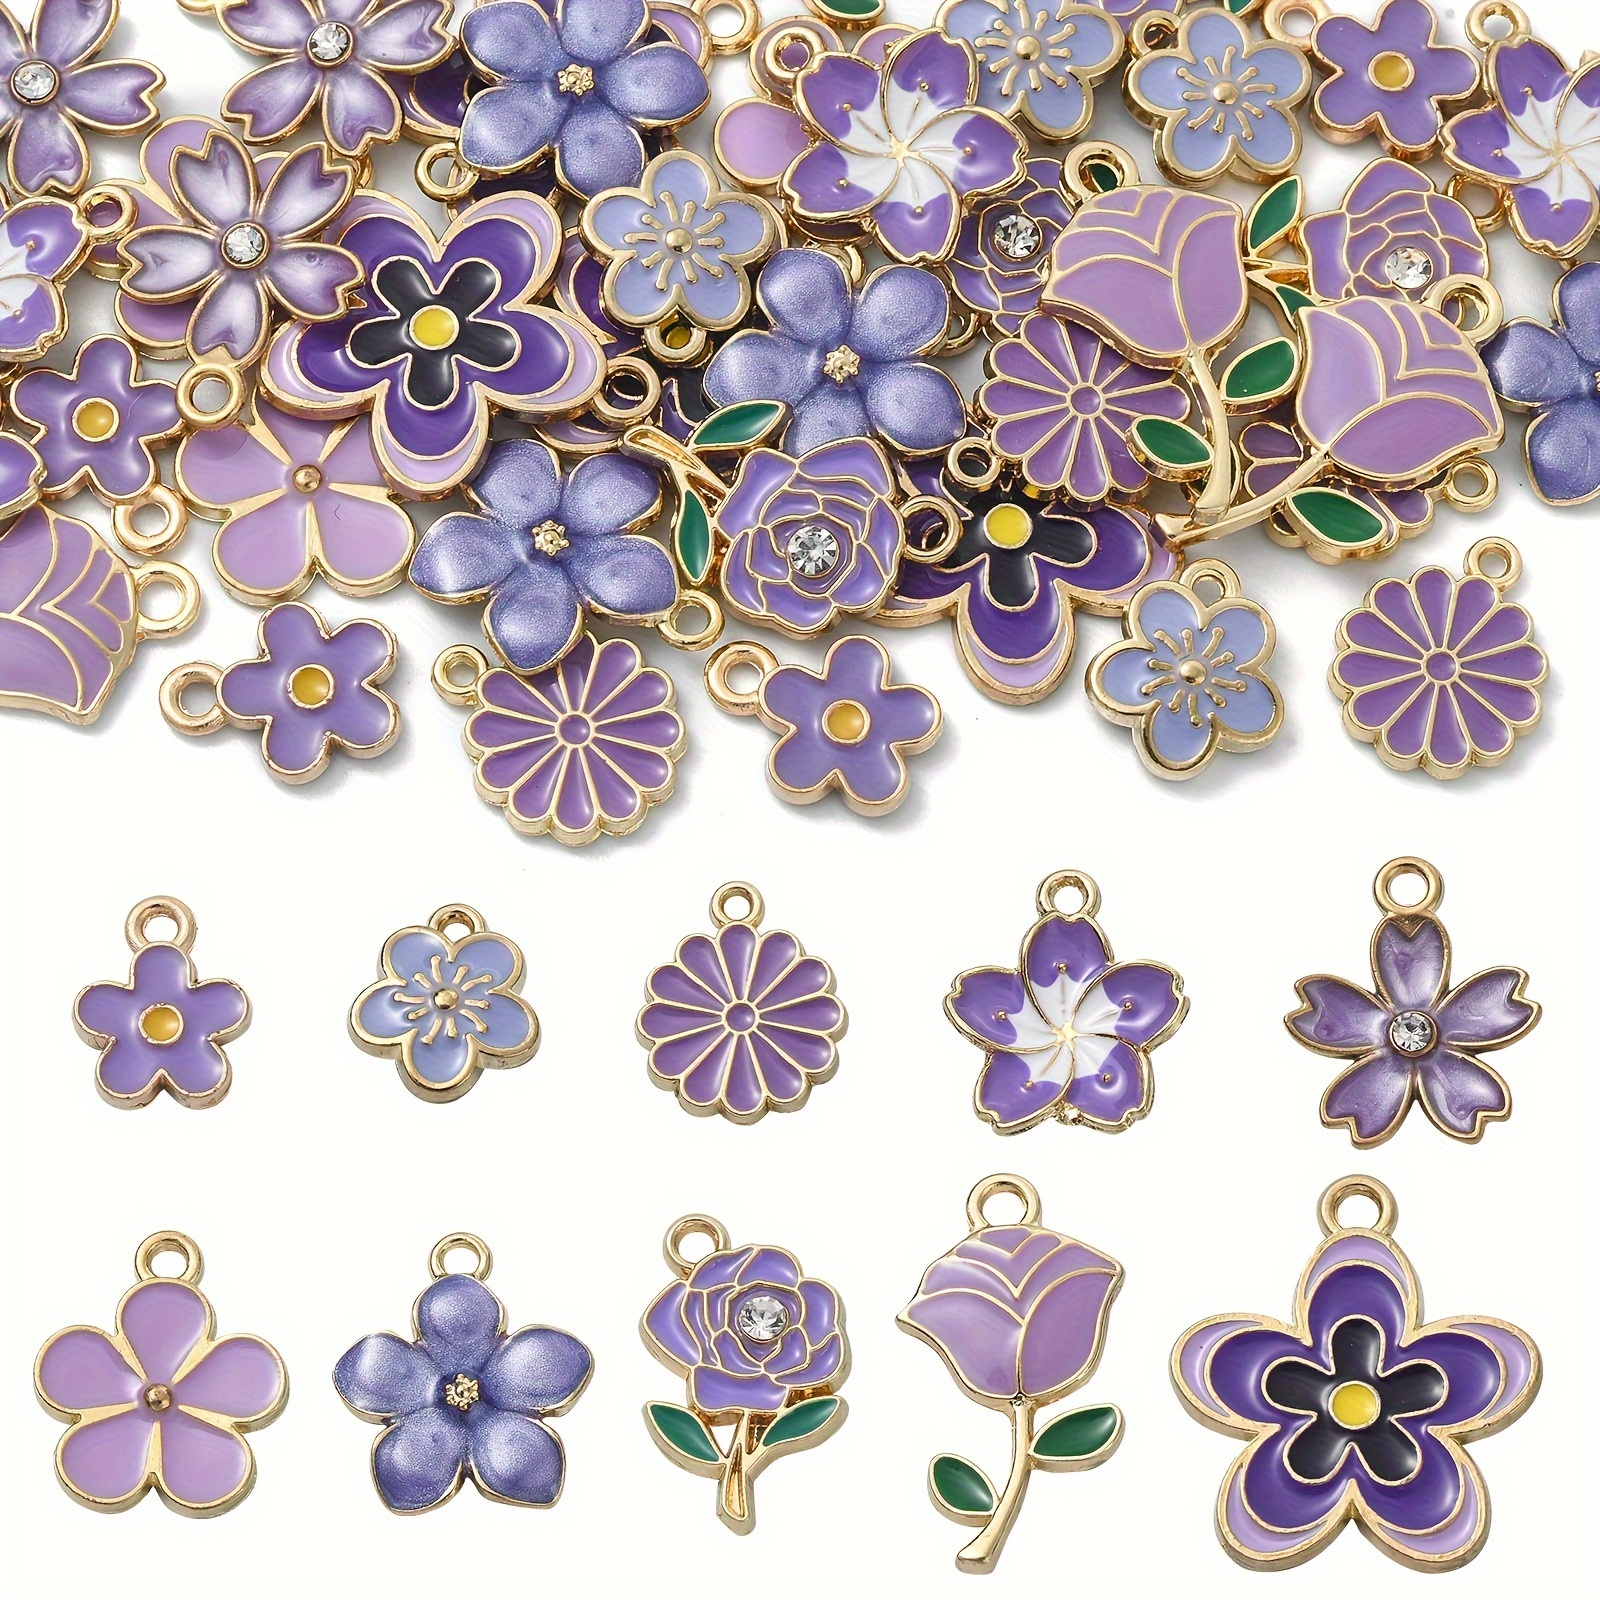 

40pcs Purple Enamel Flower Charms Set, Assorted Diy Pendant Drops For Jewelry Making, Craft Supplies With Oil Drip Design, Mixed Sizes & Styles